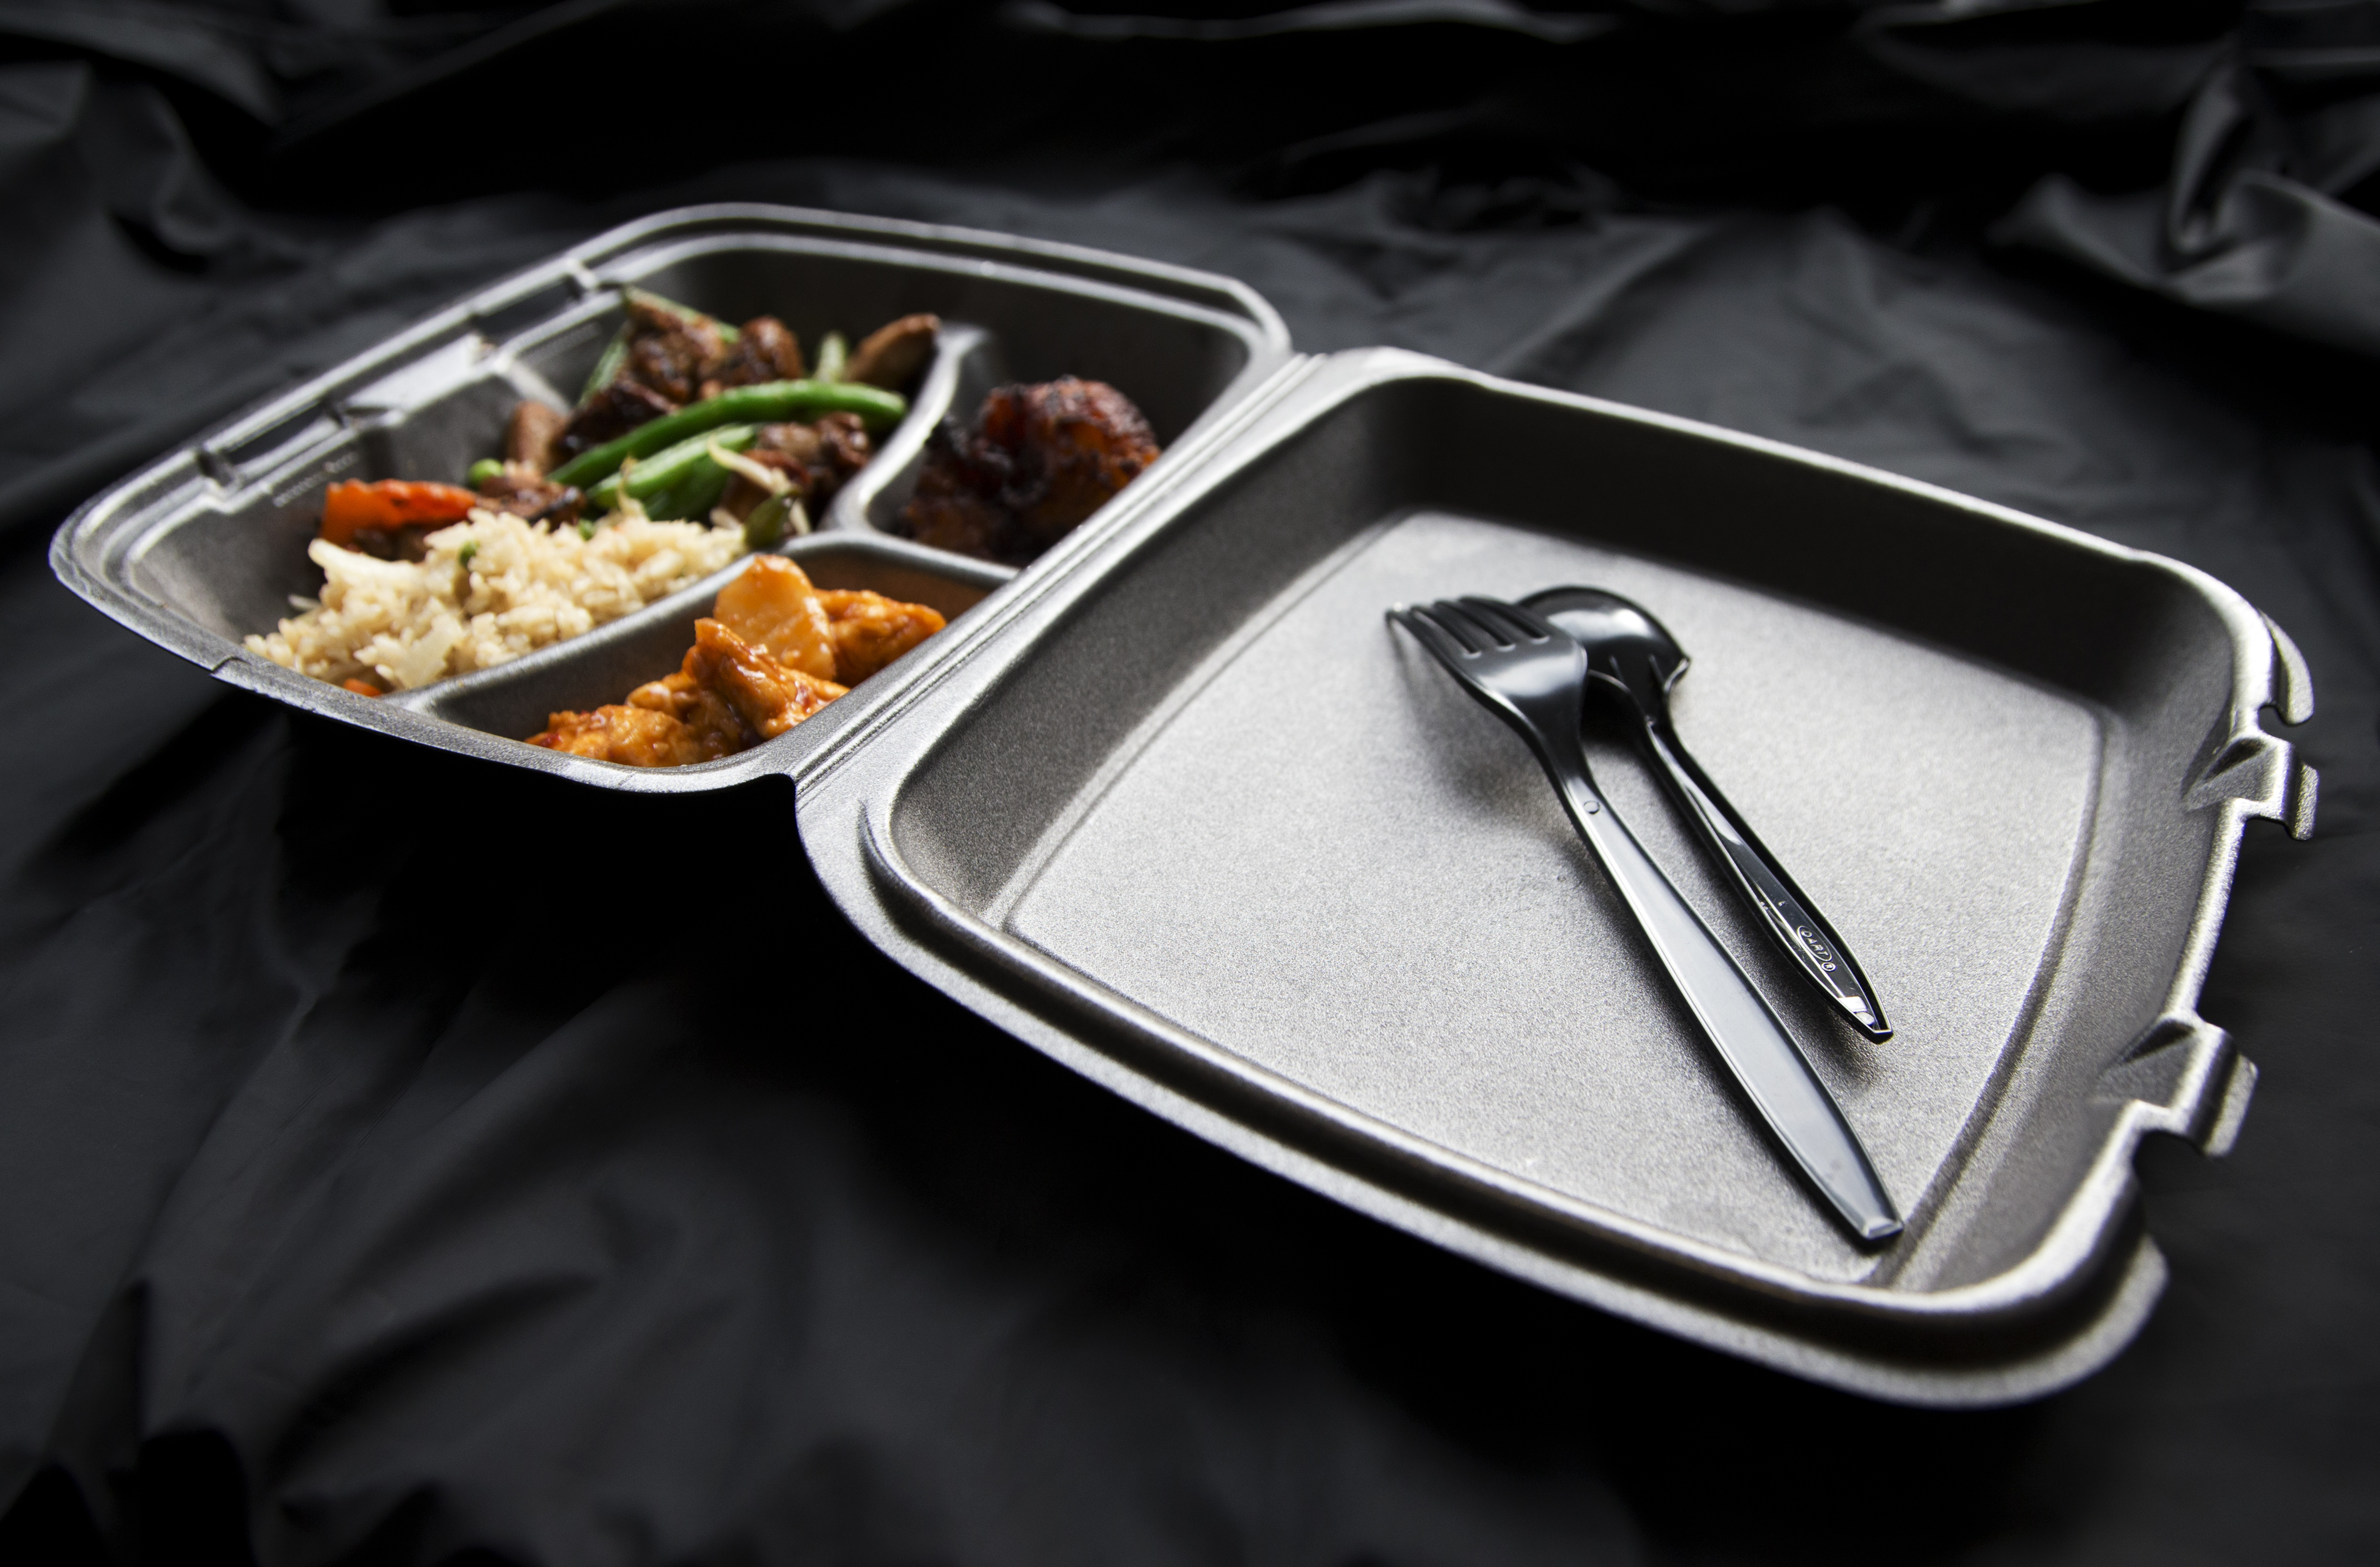 US Towns are Banning Plastic Foam Food Containers